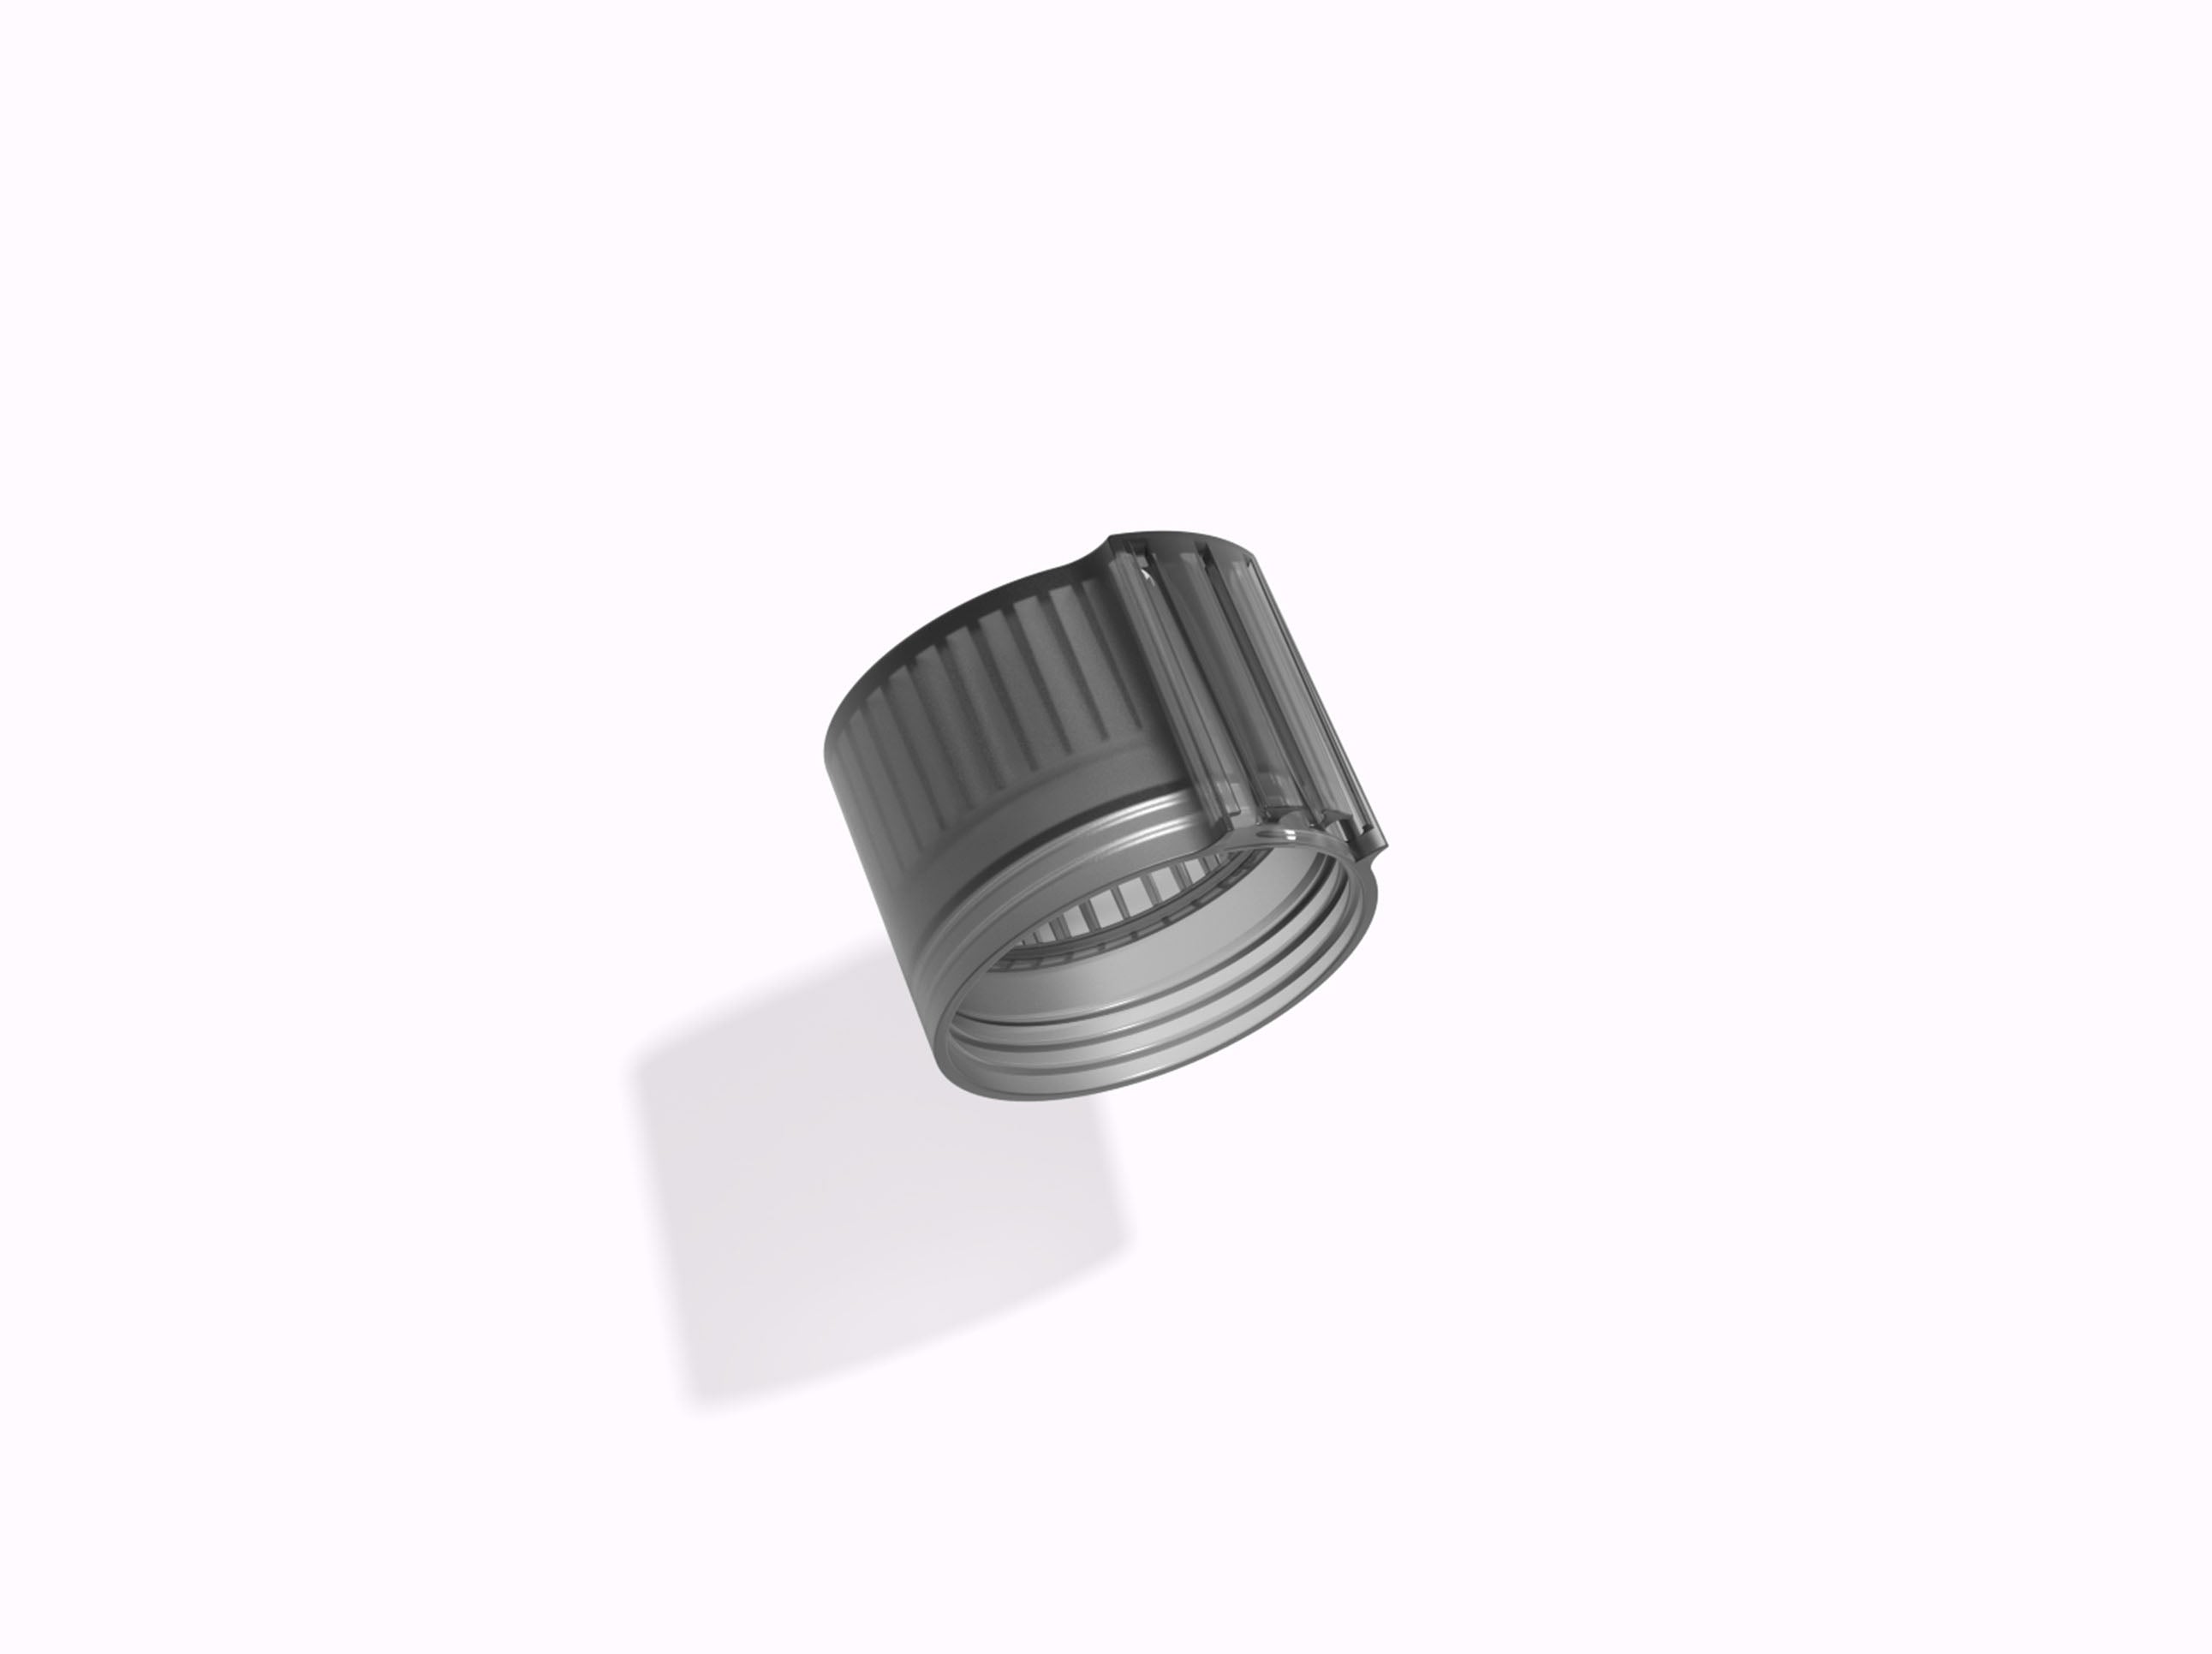 https://cdn.shopify.com/s/files/1/0562/0888/3893/products/AirUP-SparePart-Charcoal_Lid.jpg?v=1674581926